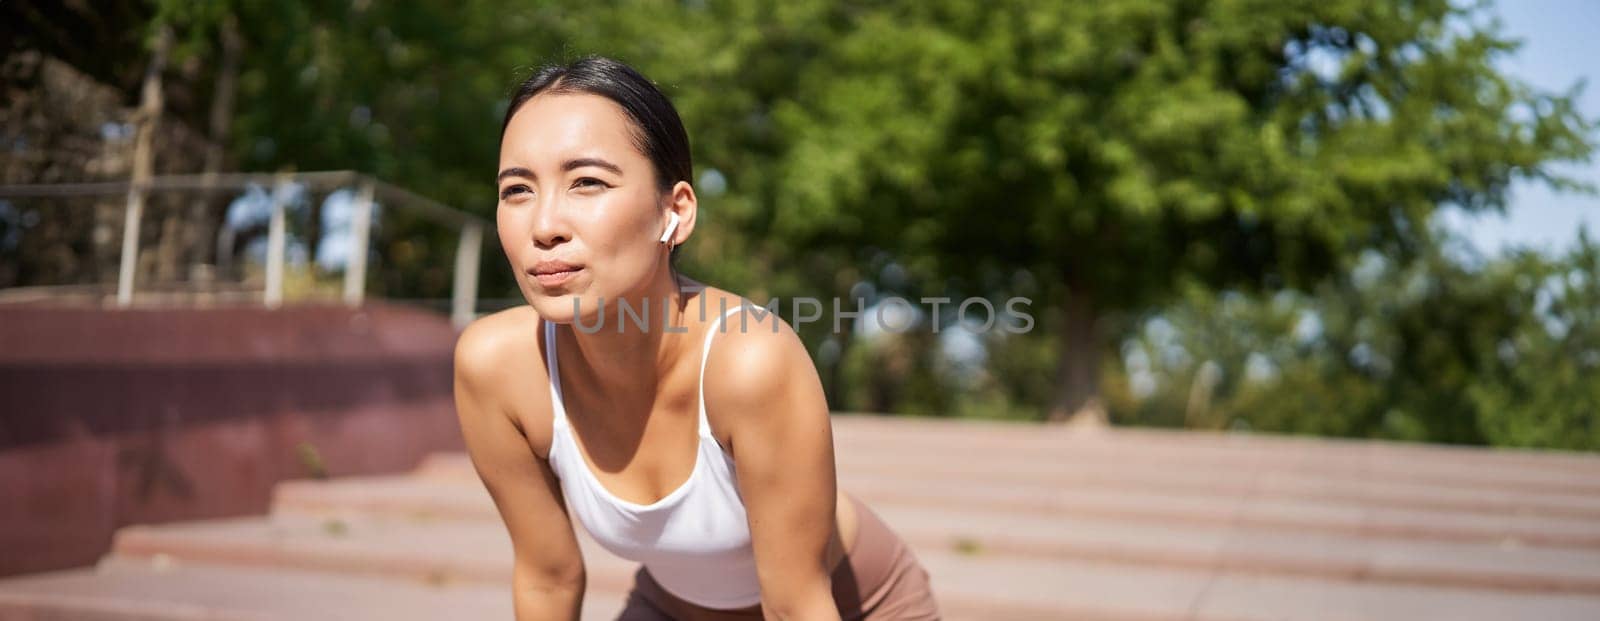 Portrait of asian woman taking break, breathing heavily and panting after running, jogger standing and wiping sweat off forehead, smiling pleased.